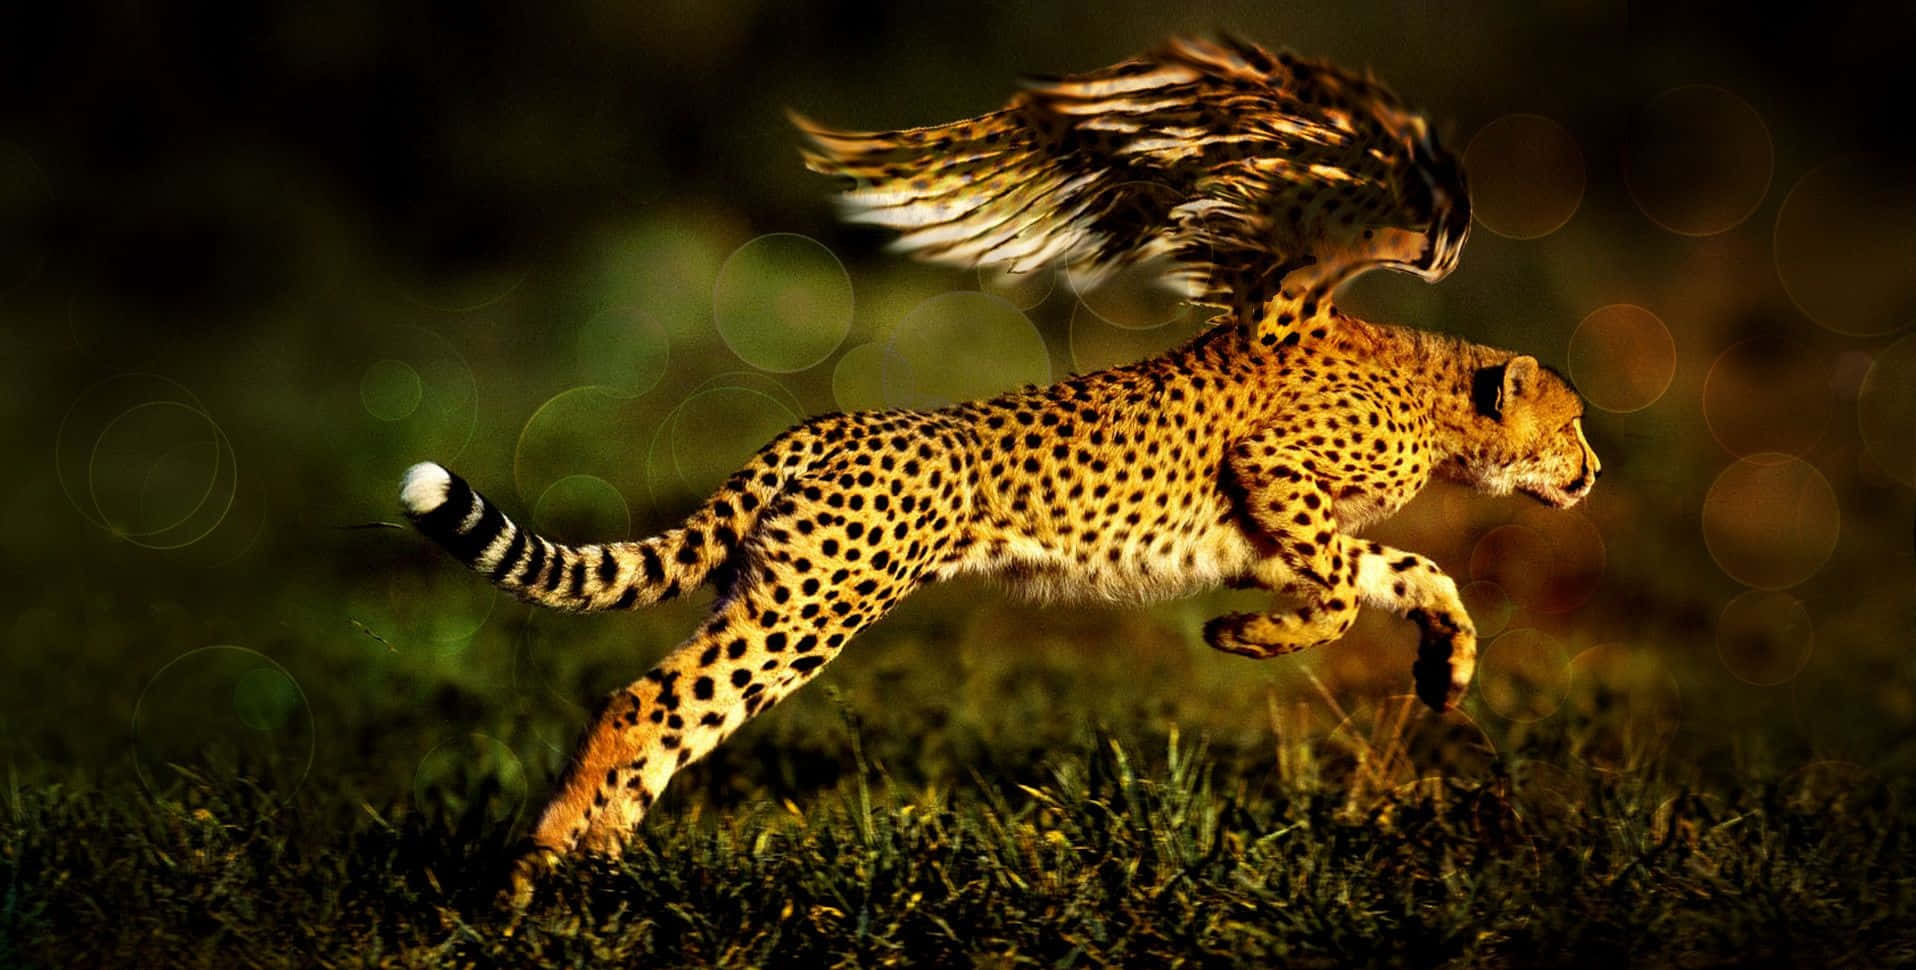 Stunning portrait of an endagered cheetah in its natural habitat